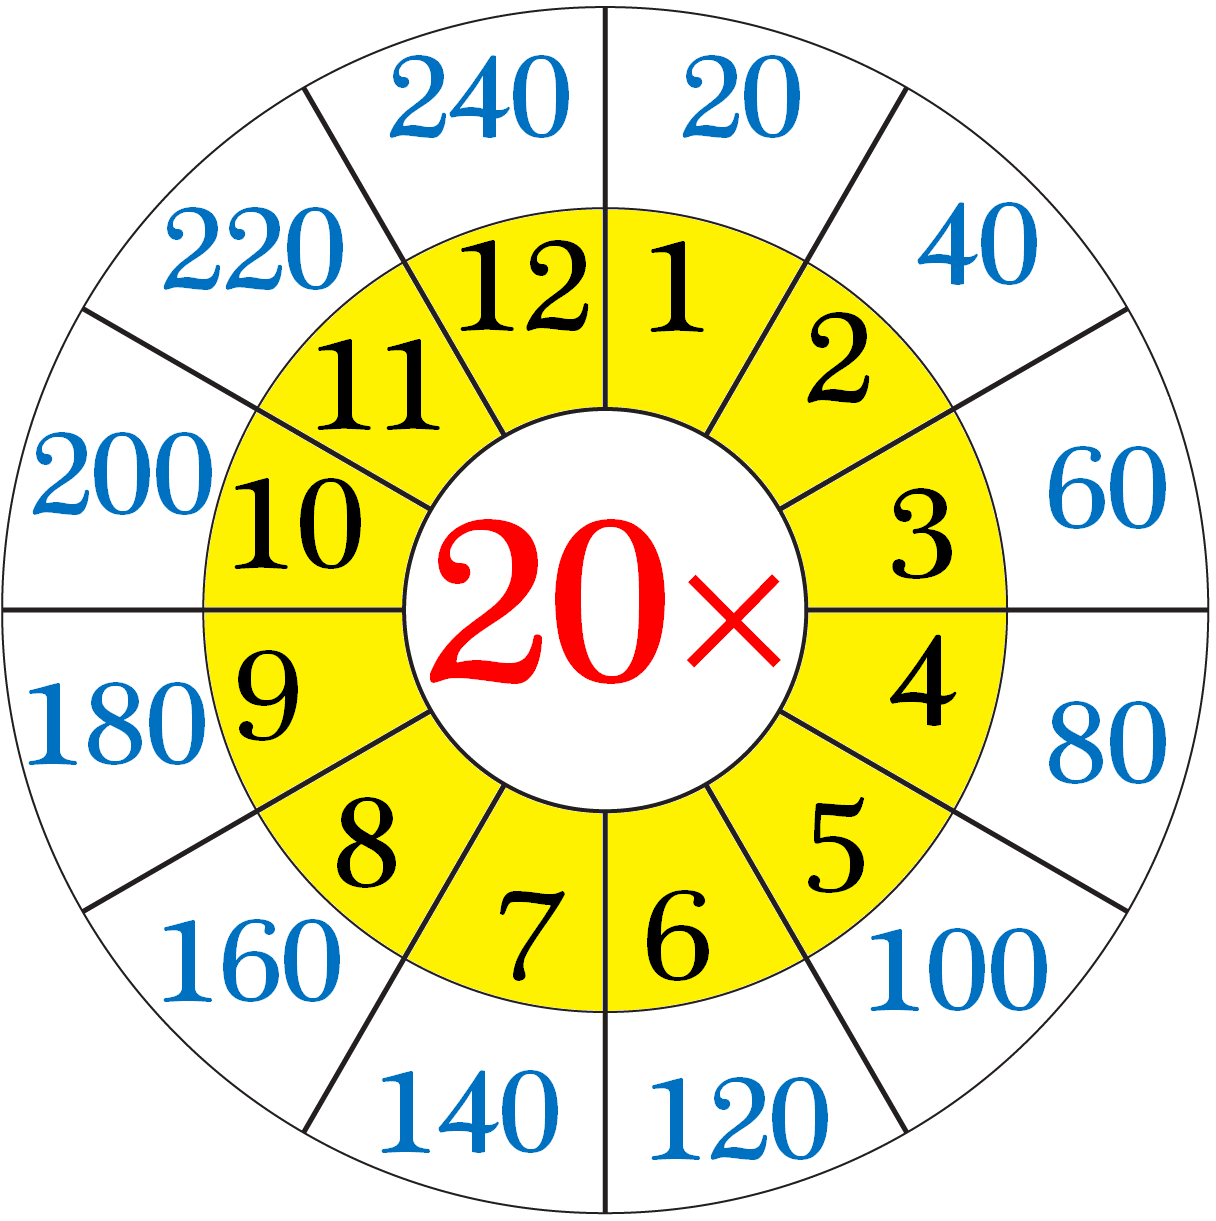 Multiplication Table Of 20 | Read And Write The Table Of 20